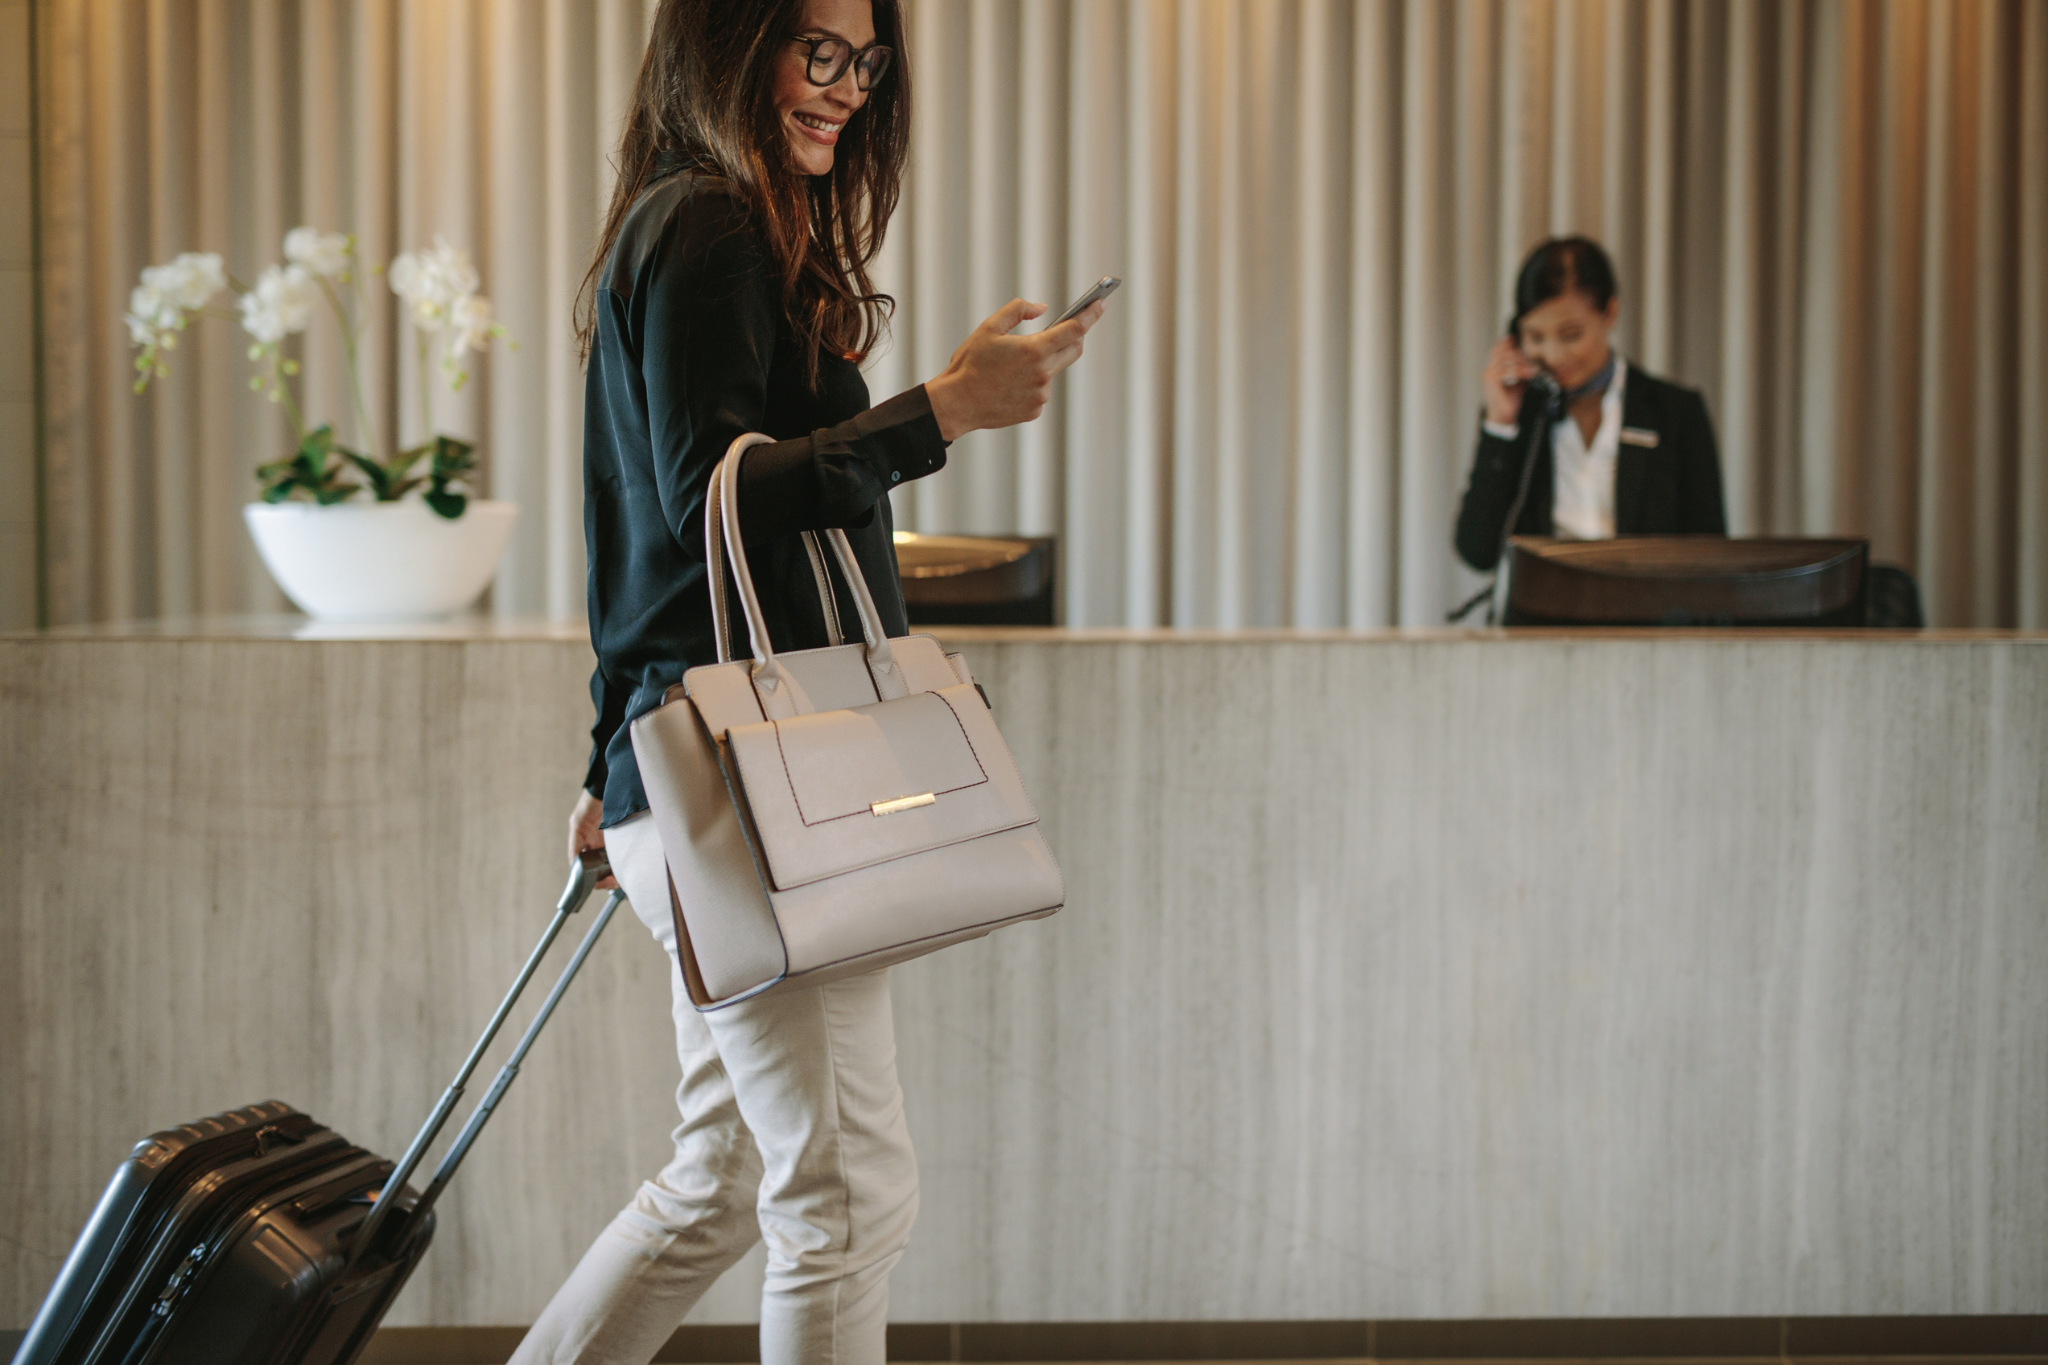 digital tipping enhances guest experience